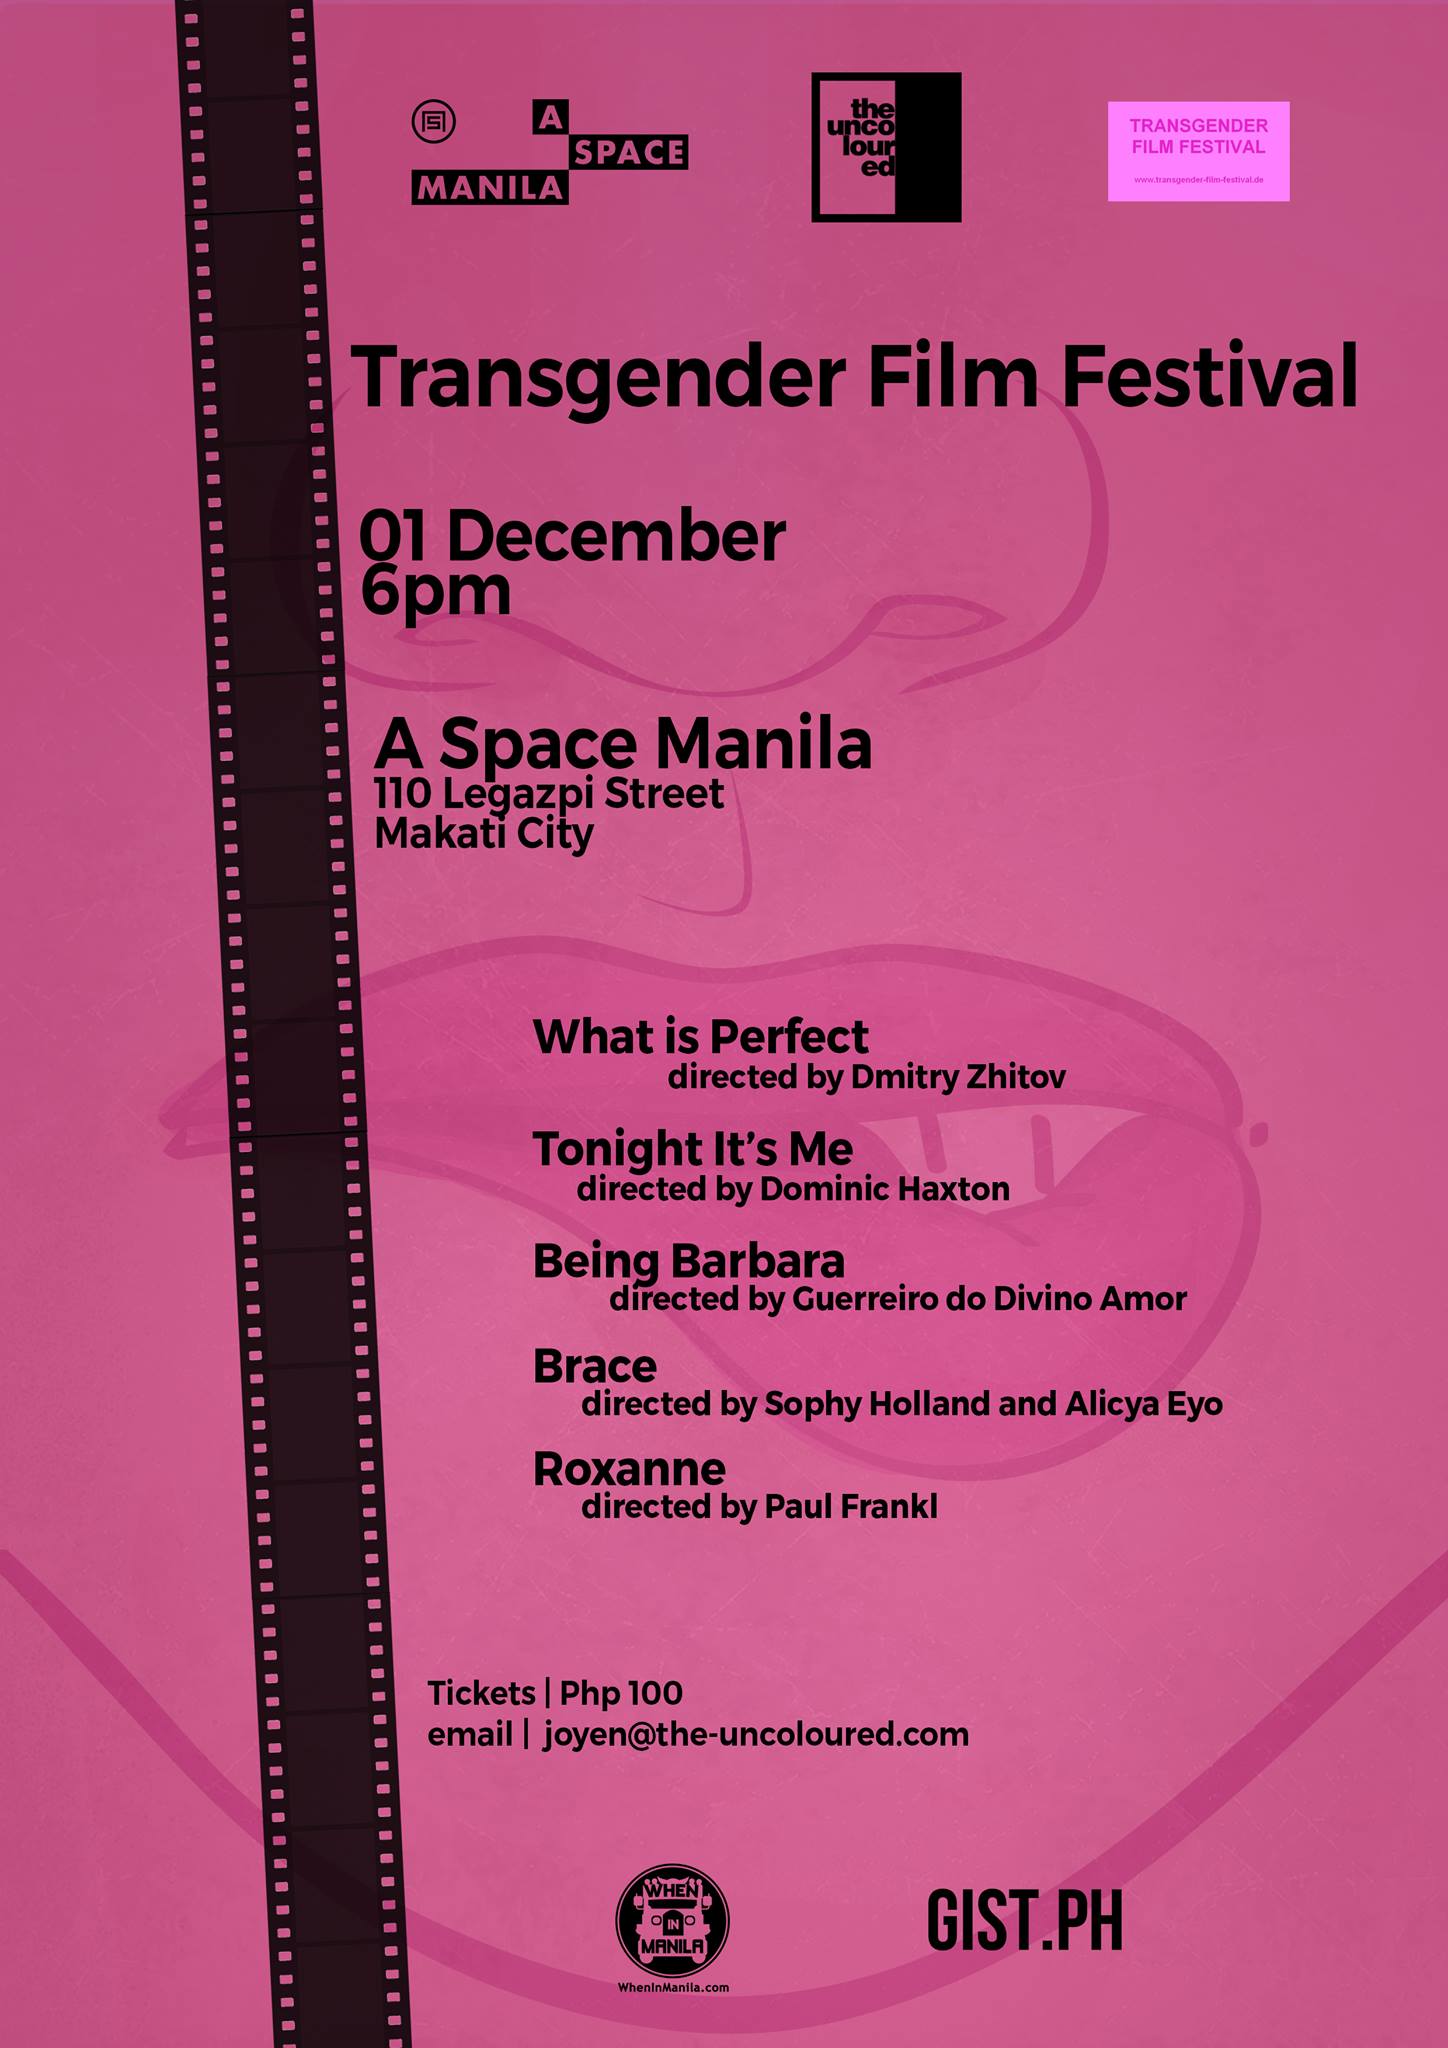 Traum Kino: Transgender Film Festival clock Tuesday, December 1 at 6:00pm Next Week · 91°F / 75°F Partly Cloudy pin Show Map A Space - Philippines 110 Legazpi Street, 1229 Makati, Philippines Traum-Kino: Transgender Film Festival www.transgender-film-festival.de December 1, 6PM A Space - Philippines, 110 Legazpi Street, Makati City 1229 Kalakhang Manila TICKETS | Php100 Email joyen@the-uncoloured.com for reservations with Official Media Partners When In Manila [WhenInManila.com] and Gist.PH List of Films: WHAT IS PERFECT (12 min.) by Dmitry Zhitov http://www.imdb.com/title/tt4547300 The definition of beauty and the relationship to parents is in the center of this Miami-Drag-Queen-Documentary. TONIGHT IT'S ME (13 min.) by Dominic Haxton http://www.imdb.com/title/tt3606394 A hustler and a transwoman meet in Los Angeles. They start playing a game... Awarded as best short-film, a sequel is in the making. BEING BARBARA (13 min.) by Guerreiro do Divino Amor https://www.facebook.com/BeingBarbara Documentary about Berhard who sometimes is Barbara and Barbara, who sometimes is Bernhard BRACE (25 min.) by Sophy Holland and Alicya Eyo https://www.facebook.com/bracethemovie Very energetic film against homophobia/transphobia in London (contains violent-scene) ROXANNE (14 min.) by Paul Frankl http://www.imdb.com/title/tt4136956 Sweet short film about a trans-woman in London caring about a child